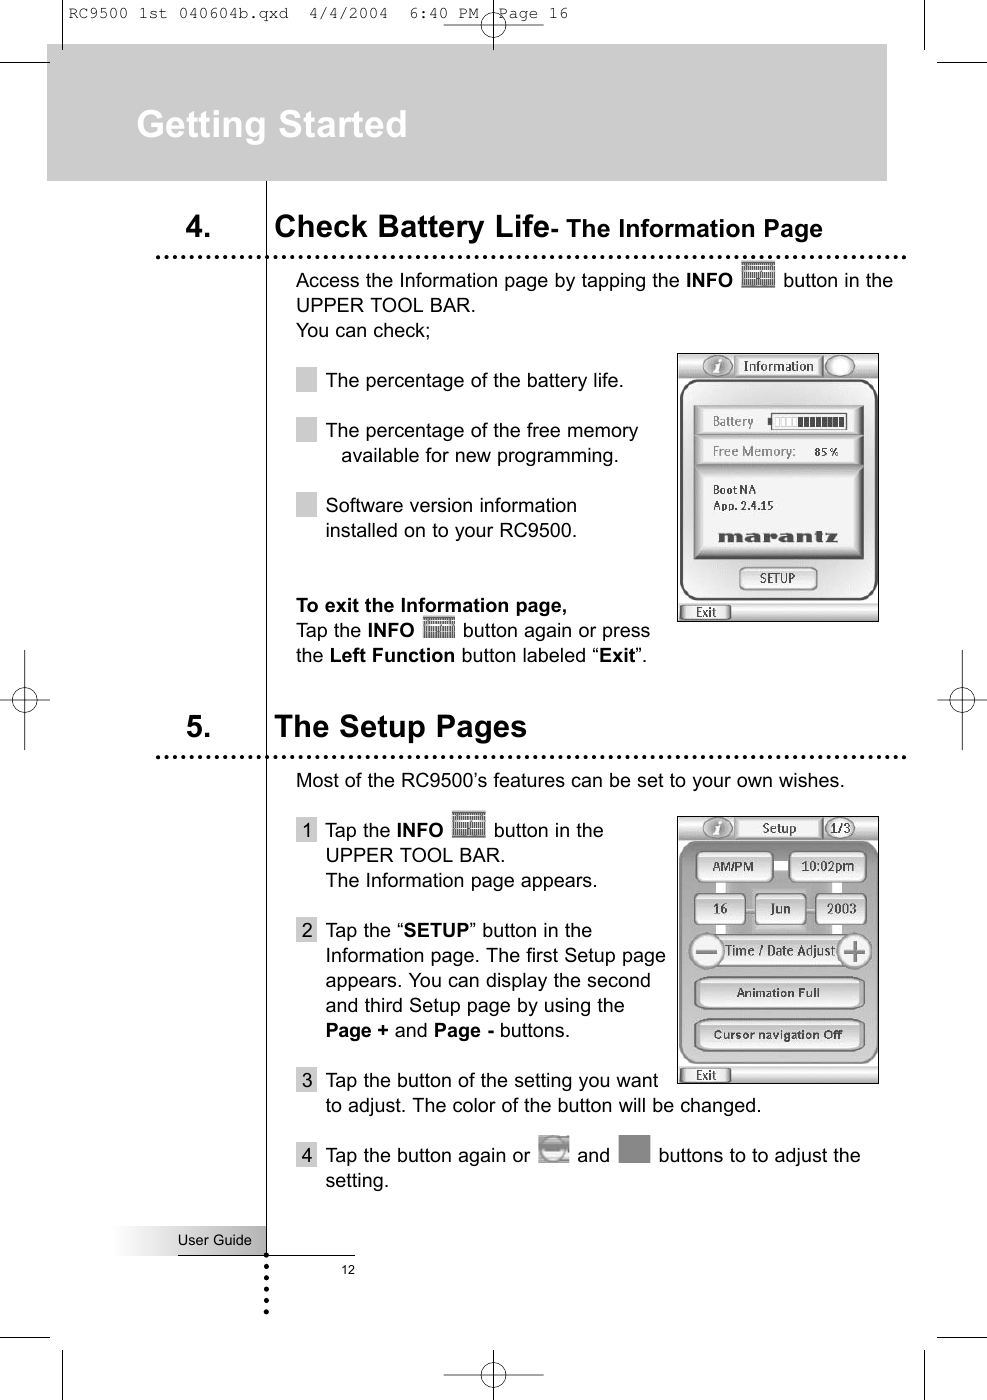 4. Check Battery Life- The Information PageAccess the Information page by tapping the INFO button in theUPPER TOOL BAR. You can check;The percentage of the battery life.The percentage of the free memory available for new programming. Software version information installed on to your RC9500. To exit the Information page, Tap the INFO button again or press the Left Function button labeled “Exit”.Most of the RC9500’s features can be set to your own wishes.1  Tap the INFO button in the UPPER TOOL BAR. The Information page appears.2  Tap the “SETUP” button in the Information page. The first Setup page appears. You can display the second and third Setup page by using the Page + and Page - buttons.3 Tap the button of the setting you want to adjust. The color of the button will be changed.4 Tap the button again or  and  buttons to to adjust thesetting.User Guide12Getting Started5. The Setup PagesRC9500 1st 040604b.qxd  4/4/2004  6:40 PM  Page 16